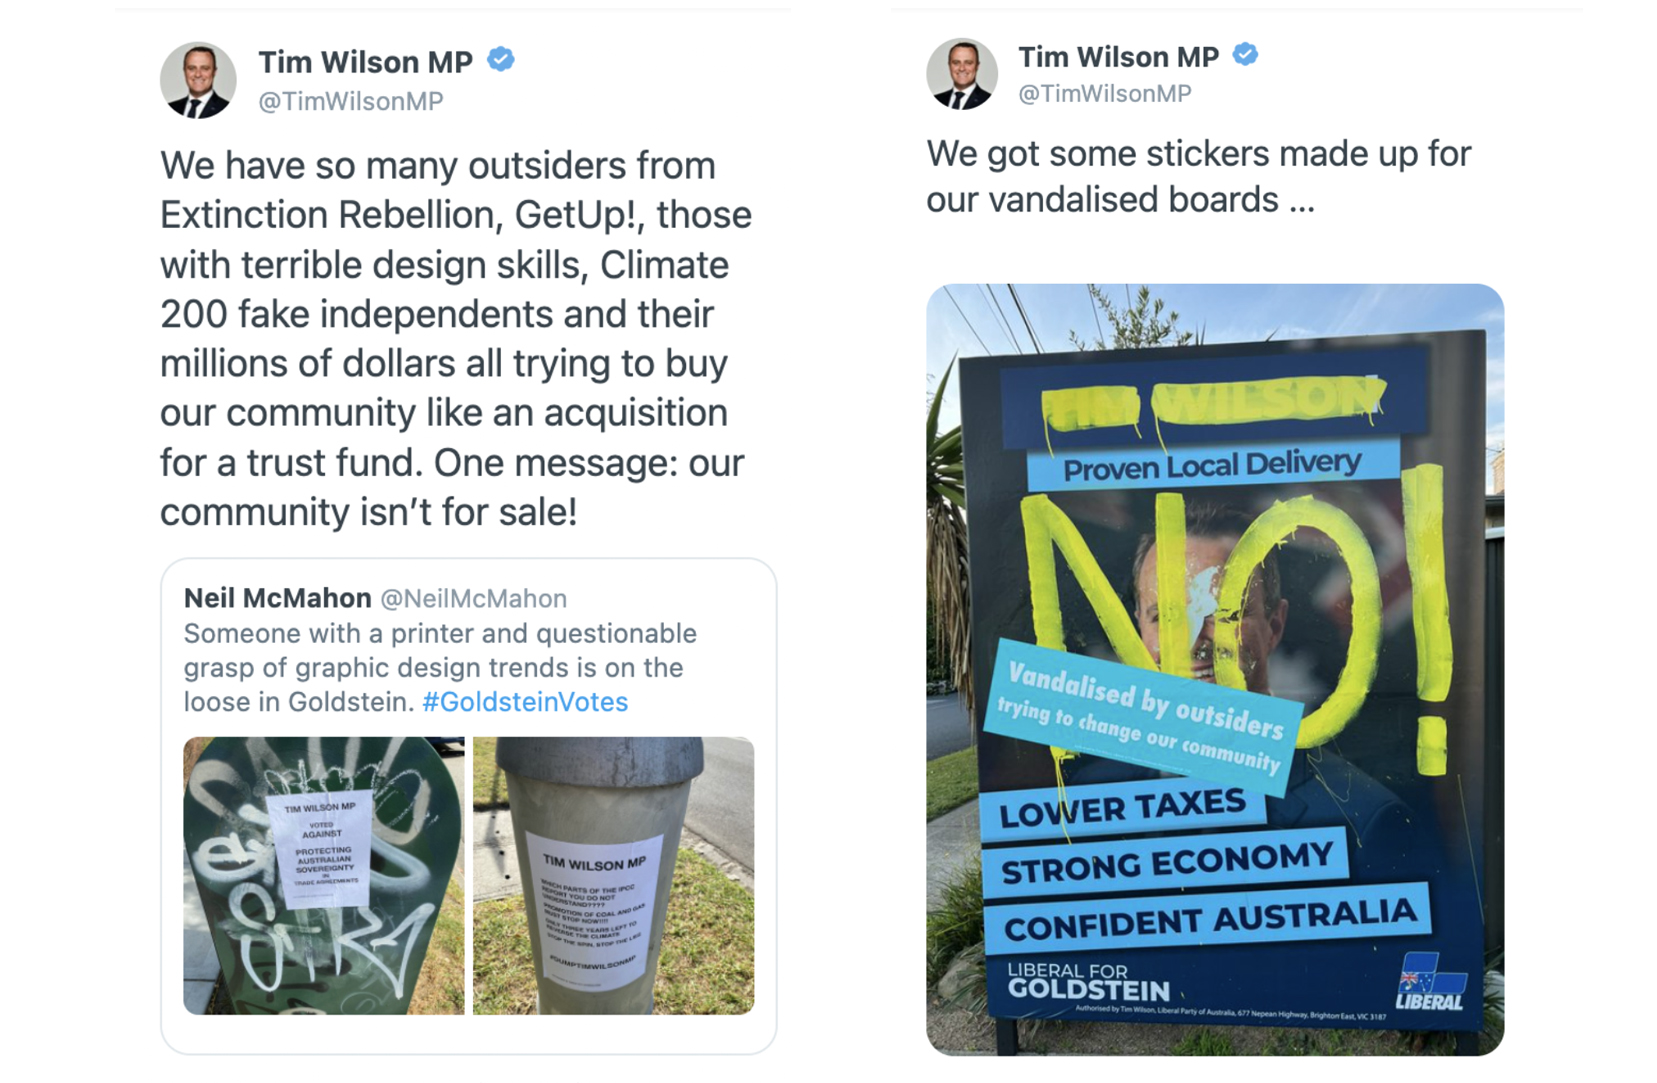 Two tweets side by side. The tweet on the right includes a photo of a large advertisting hoarding with Tim Wilson's face on it that has been defaced. The left tweet shows him responding to claims of low-level vandalism.